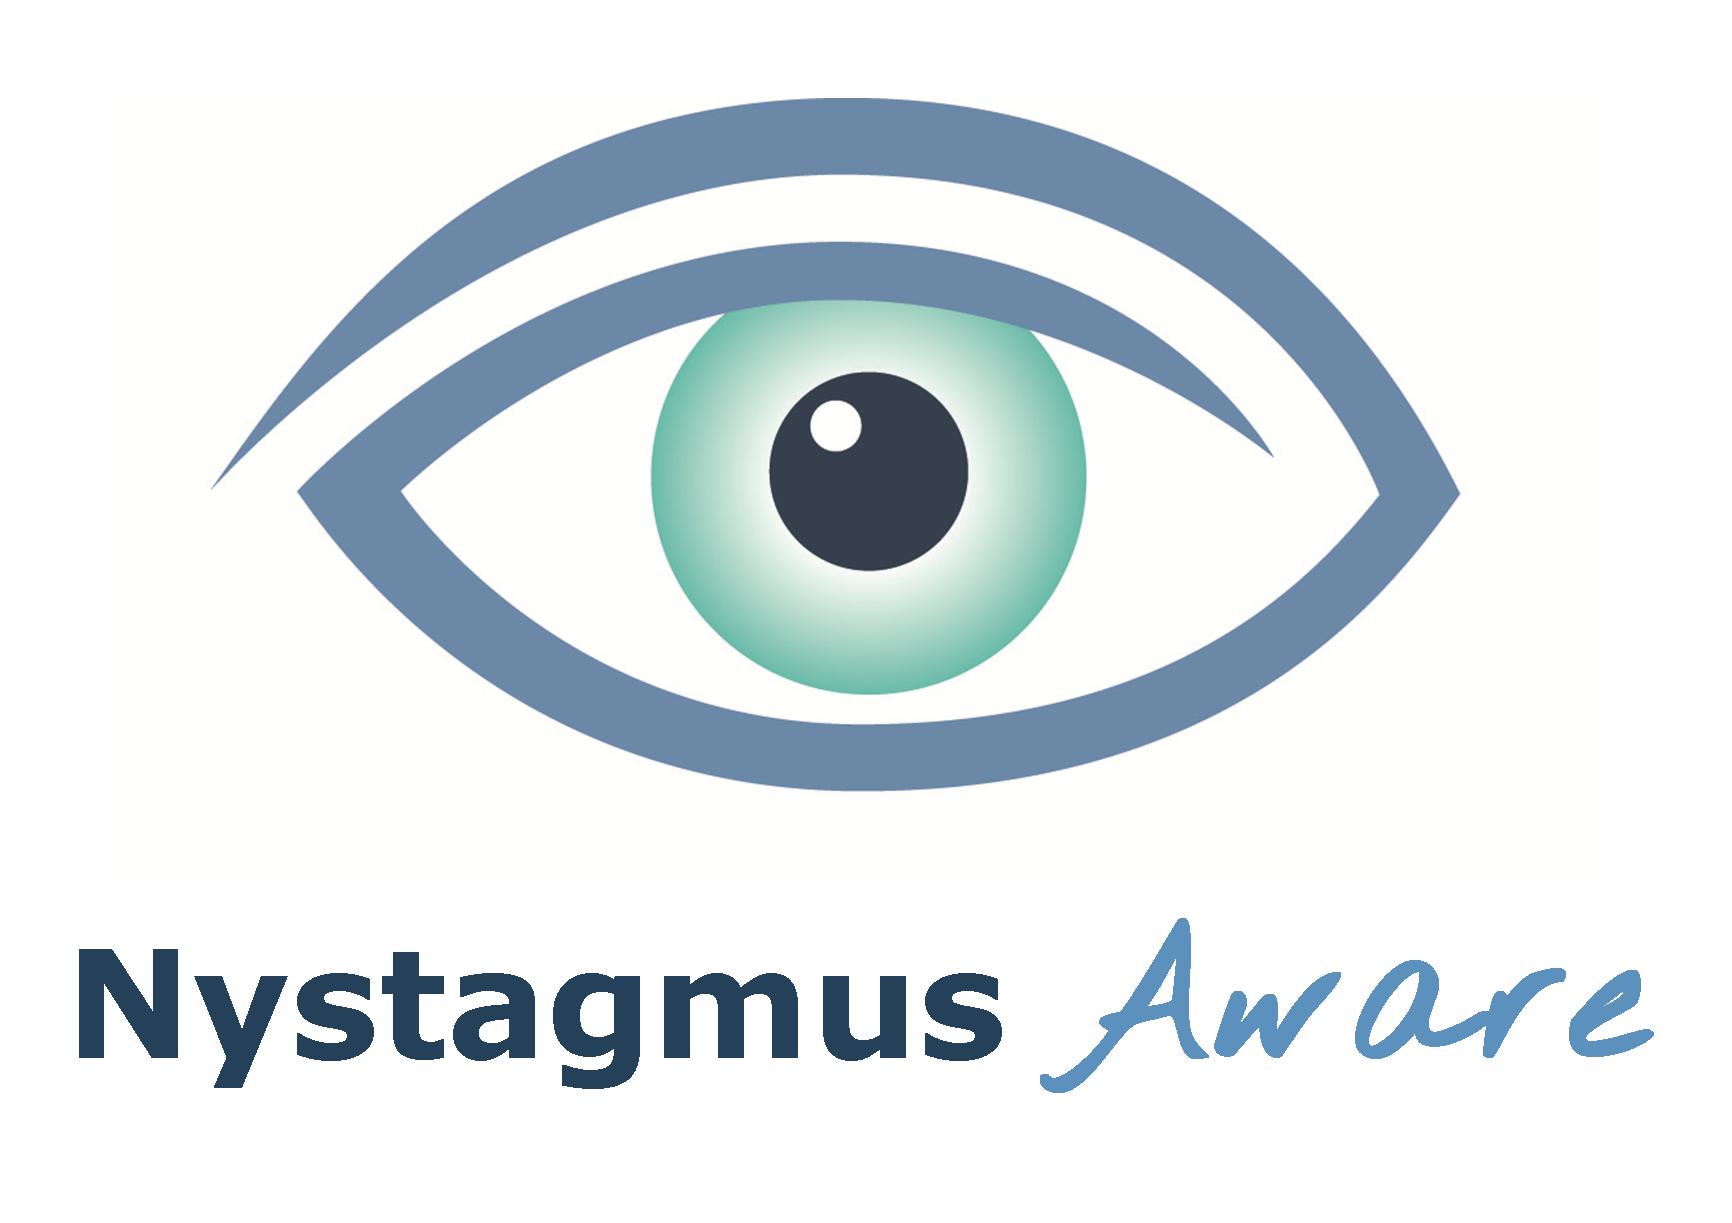 The eye logo of the Nystagmus Network and the words nystagmus aware.